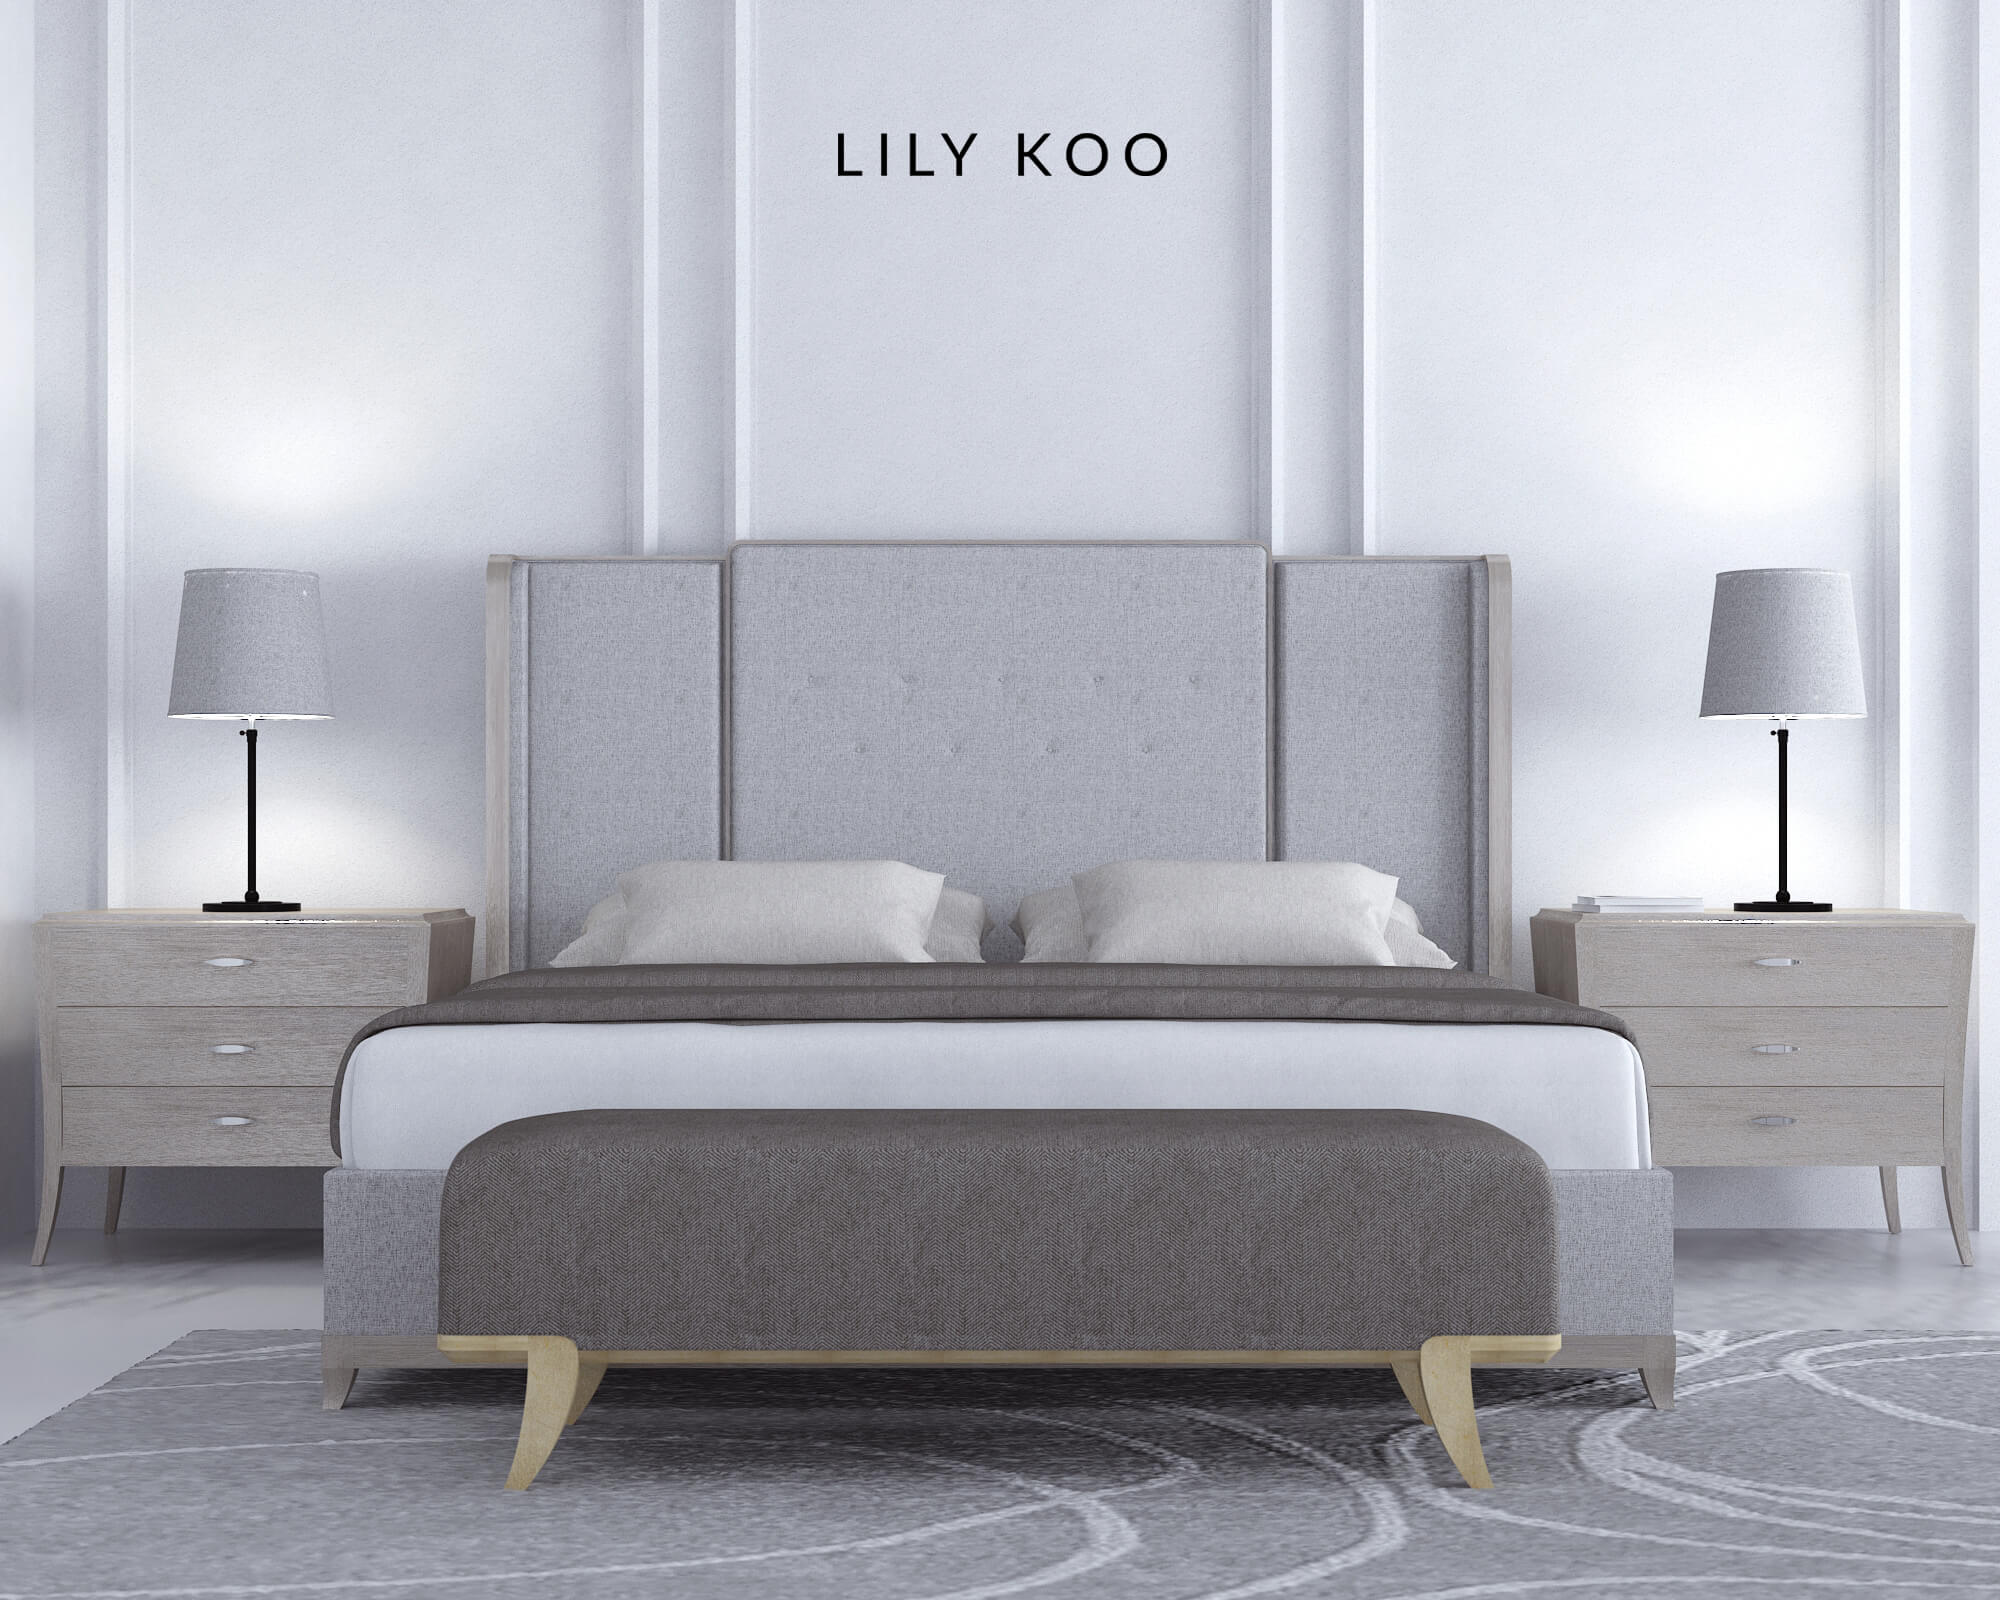 Lily Koo bedroom with bedside tables and lamps